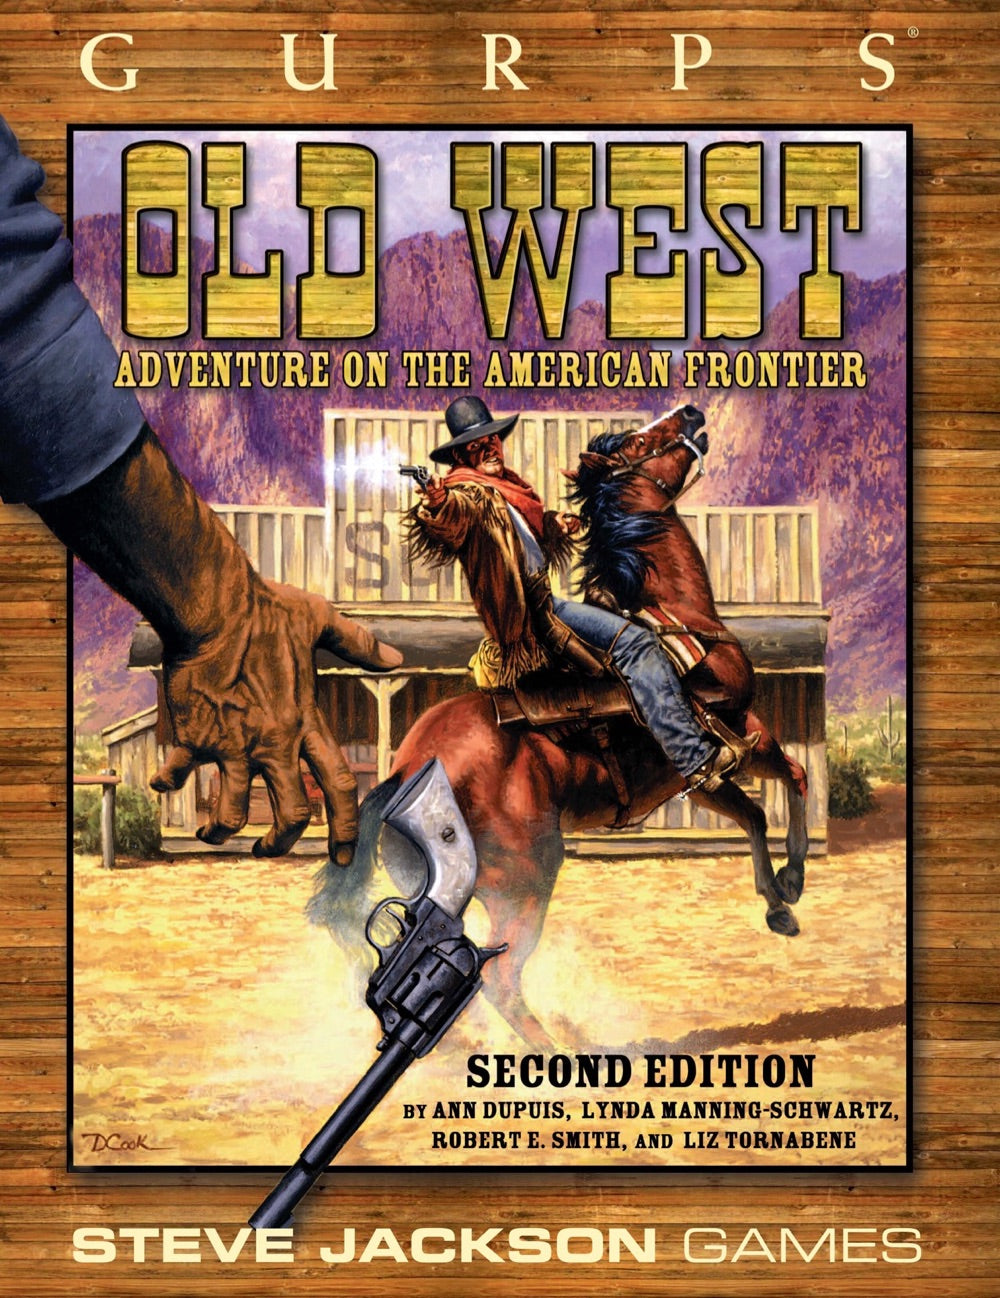 GURPS Classic: Old West